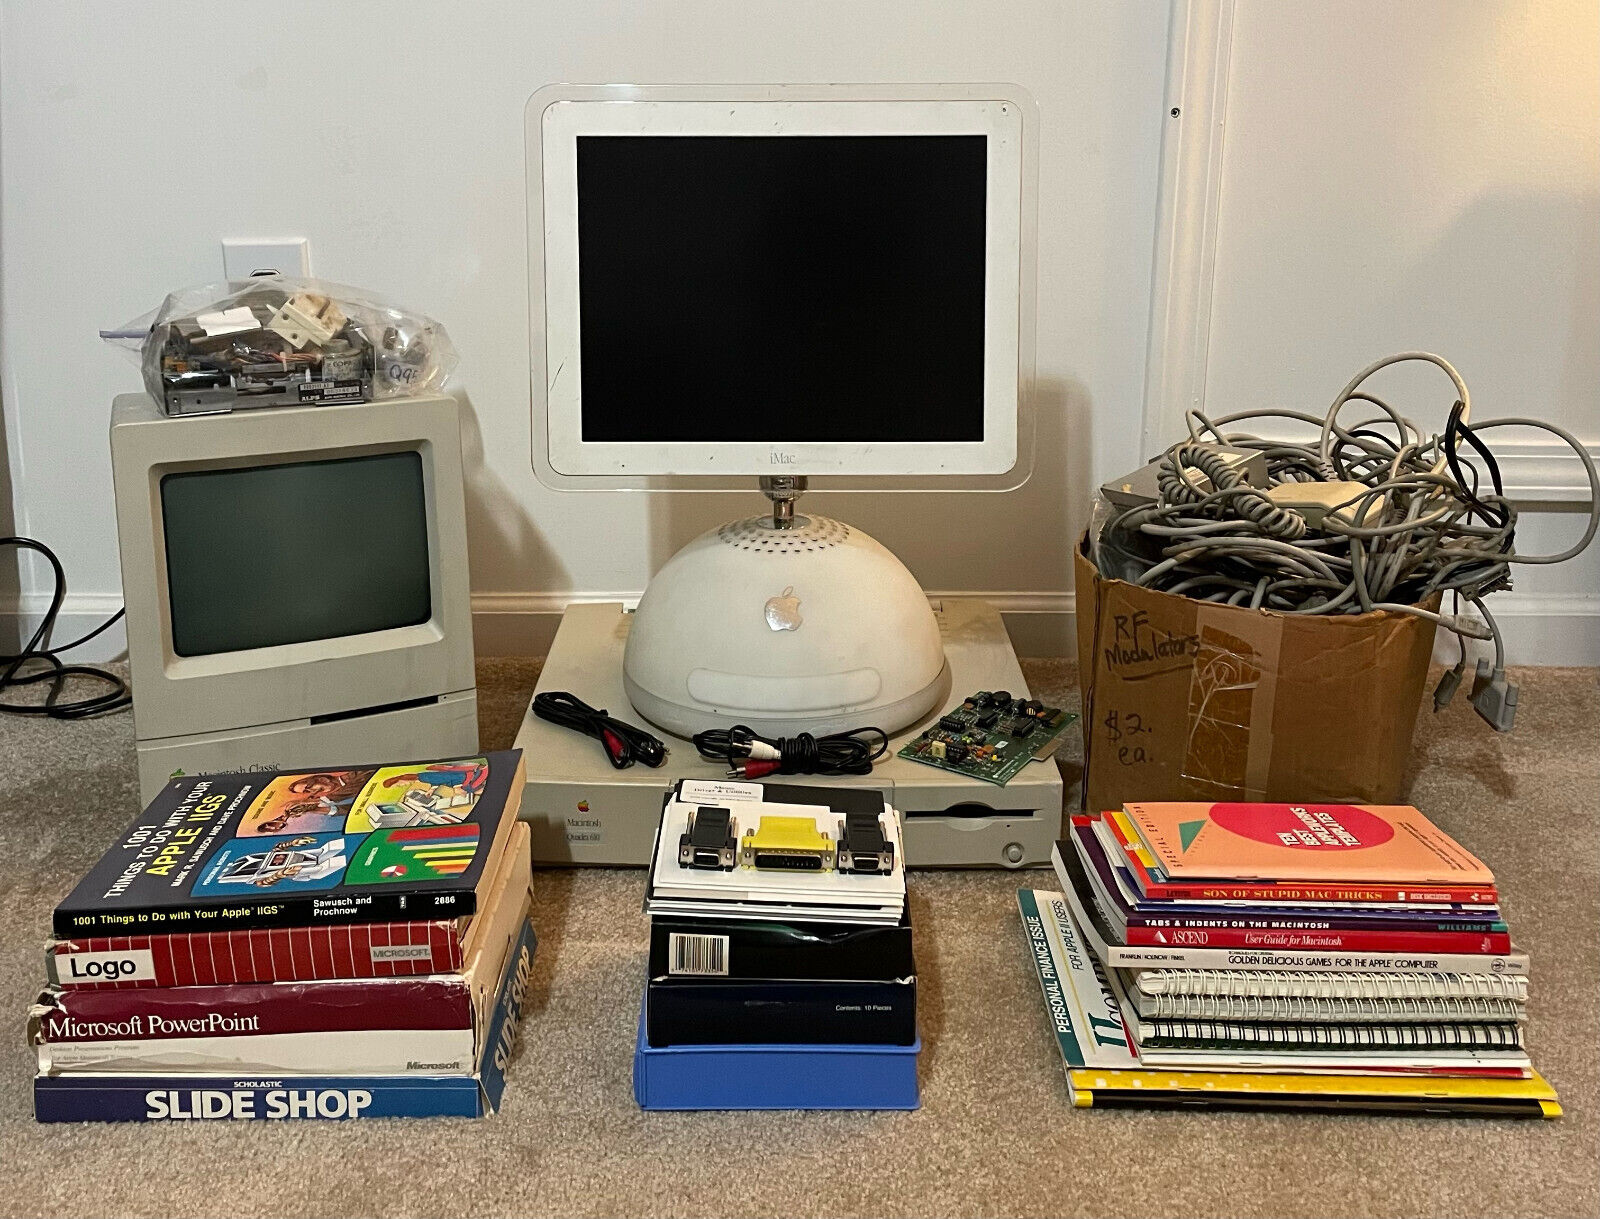 Lot of Vintage Apple Macintosh Computers, Manuals, and Software